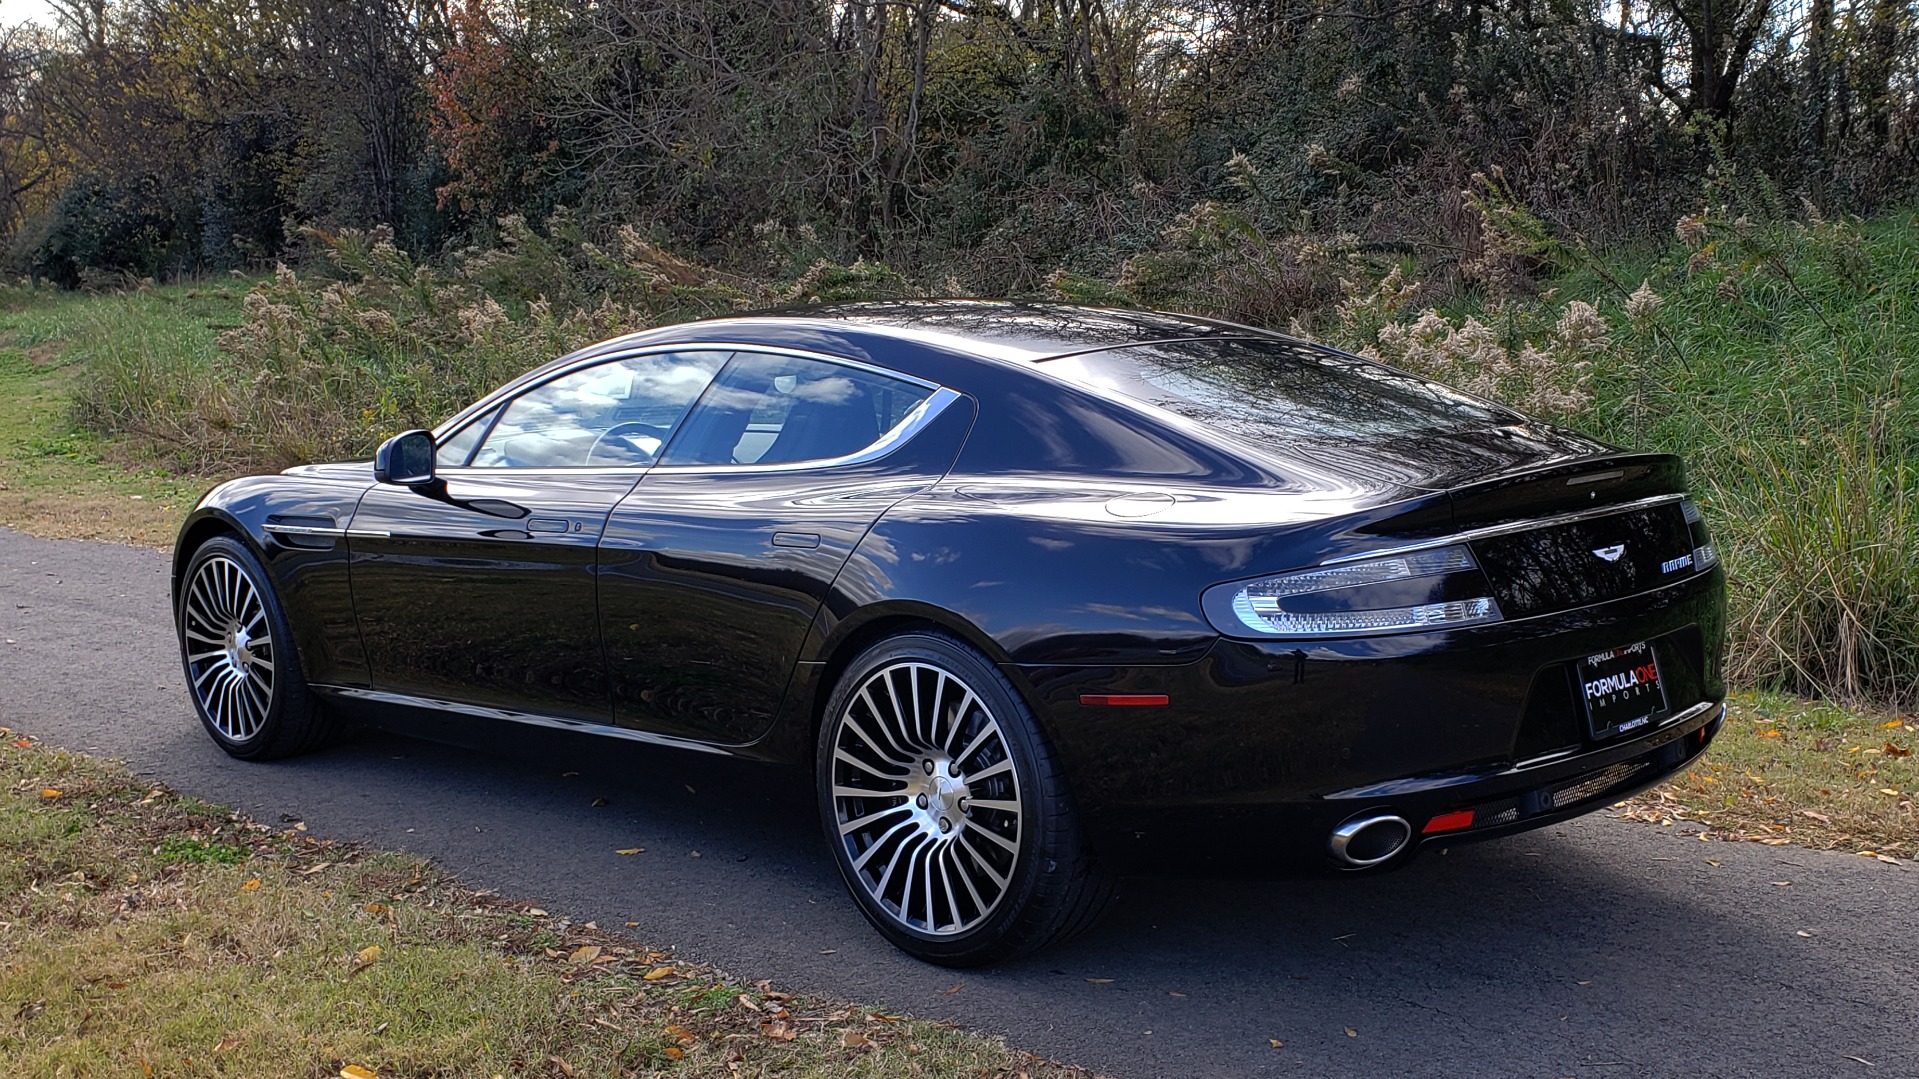 Used 2012 Aston Martin RAPIDE LUXURY 6.0L V12 / NAV / B&O SND / ENTERTAINMENT / REARVIEW for sale Sold at Formula Imports in Charlotte NC 28227 3